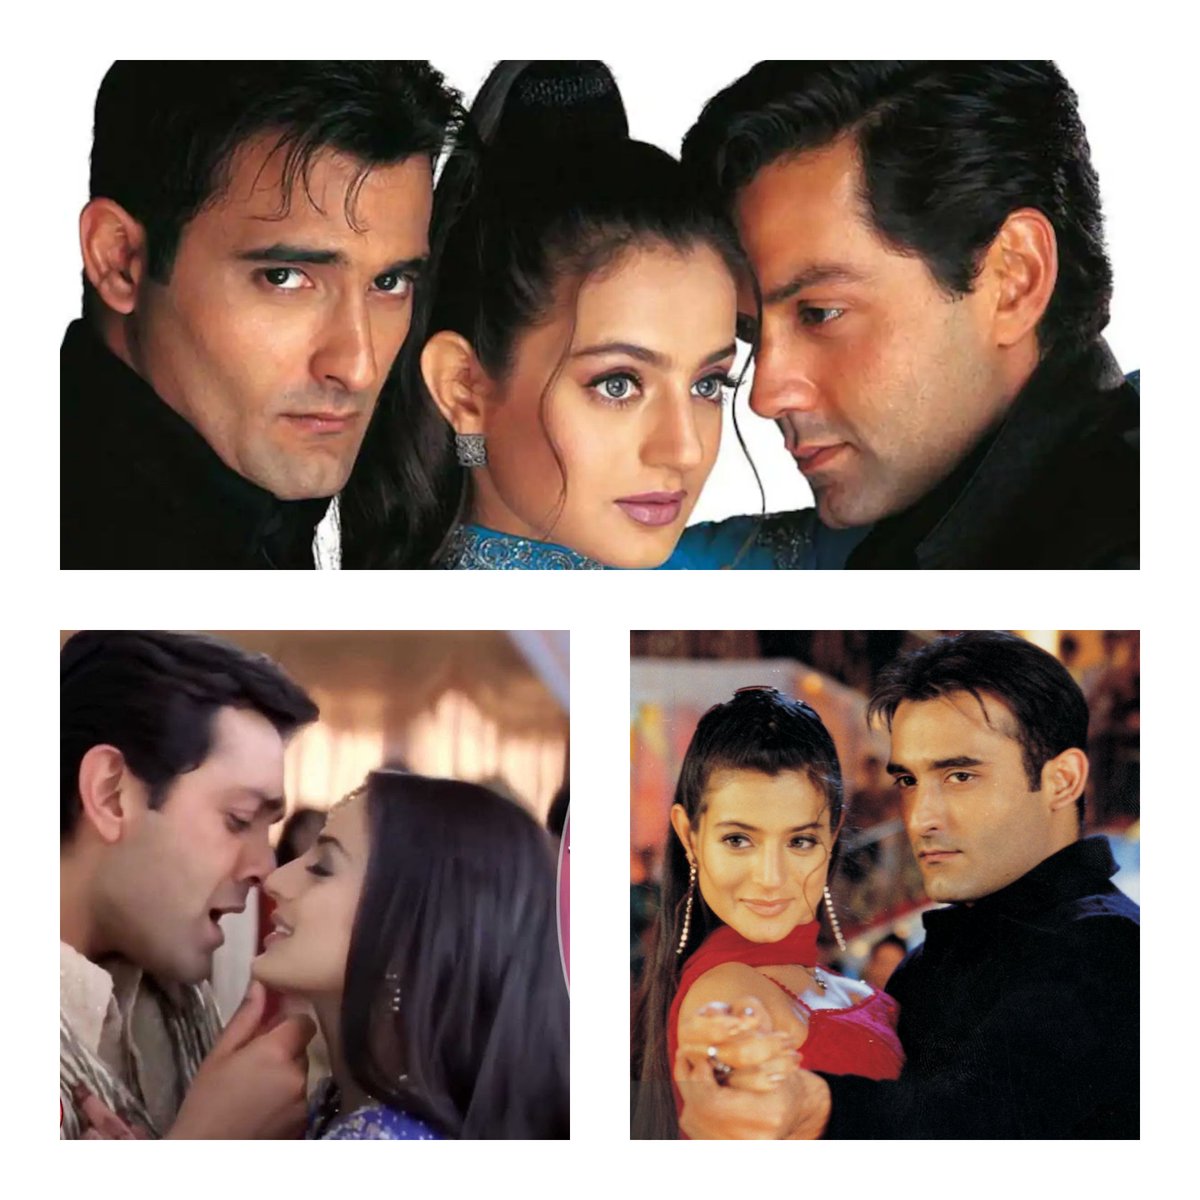 #19YearsOfHumraaz ❤

A romantic/thriller directed by #AbbasMustan 🙏🏻

The film is remake of 1998 movie #APerfectMurder directed by #AndrewDavis . 2018 Bengali movie #TuiSudhuAmaar is inspired from #Humraaz .